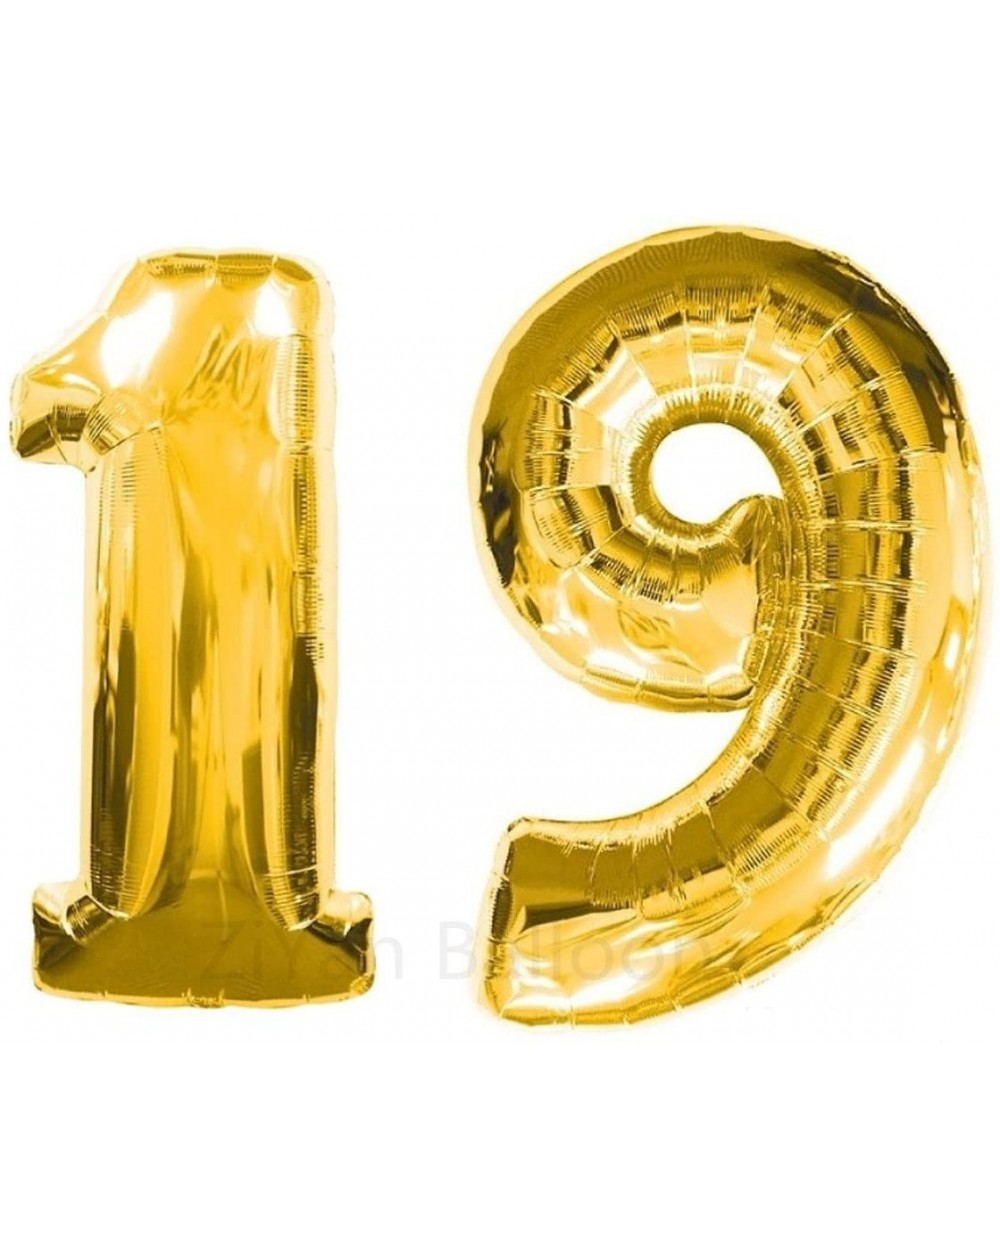 Balloons 40 Inch Giant 19th Gold Number Balloons-Birthday / Party Balloons. - Gold Number 19 - CA186HIRO88 $8.72